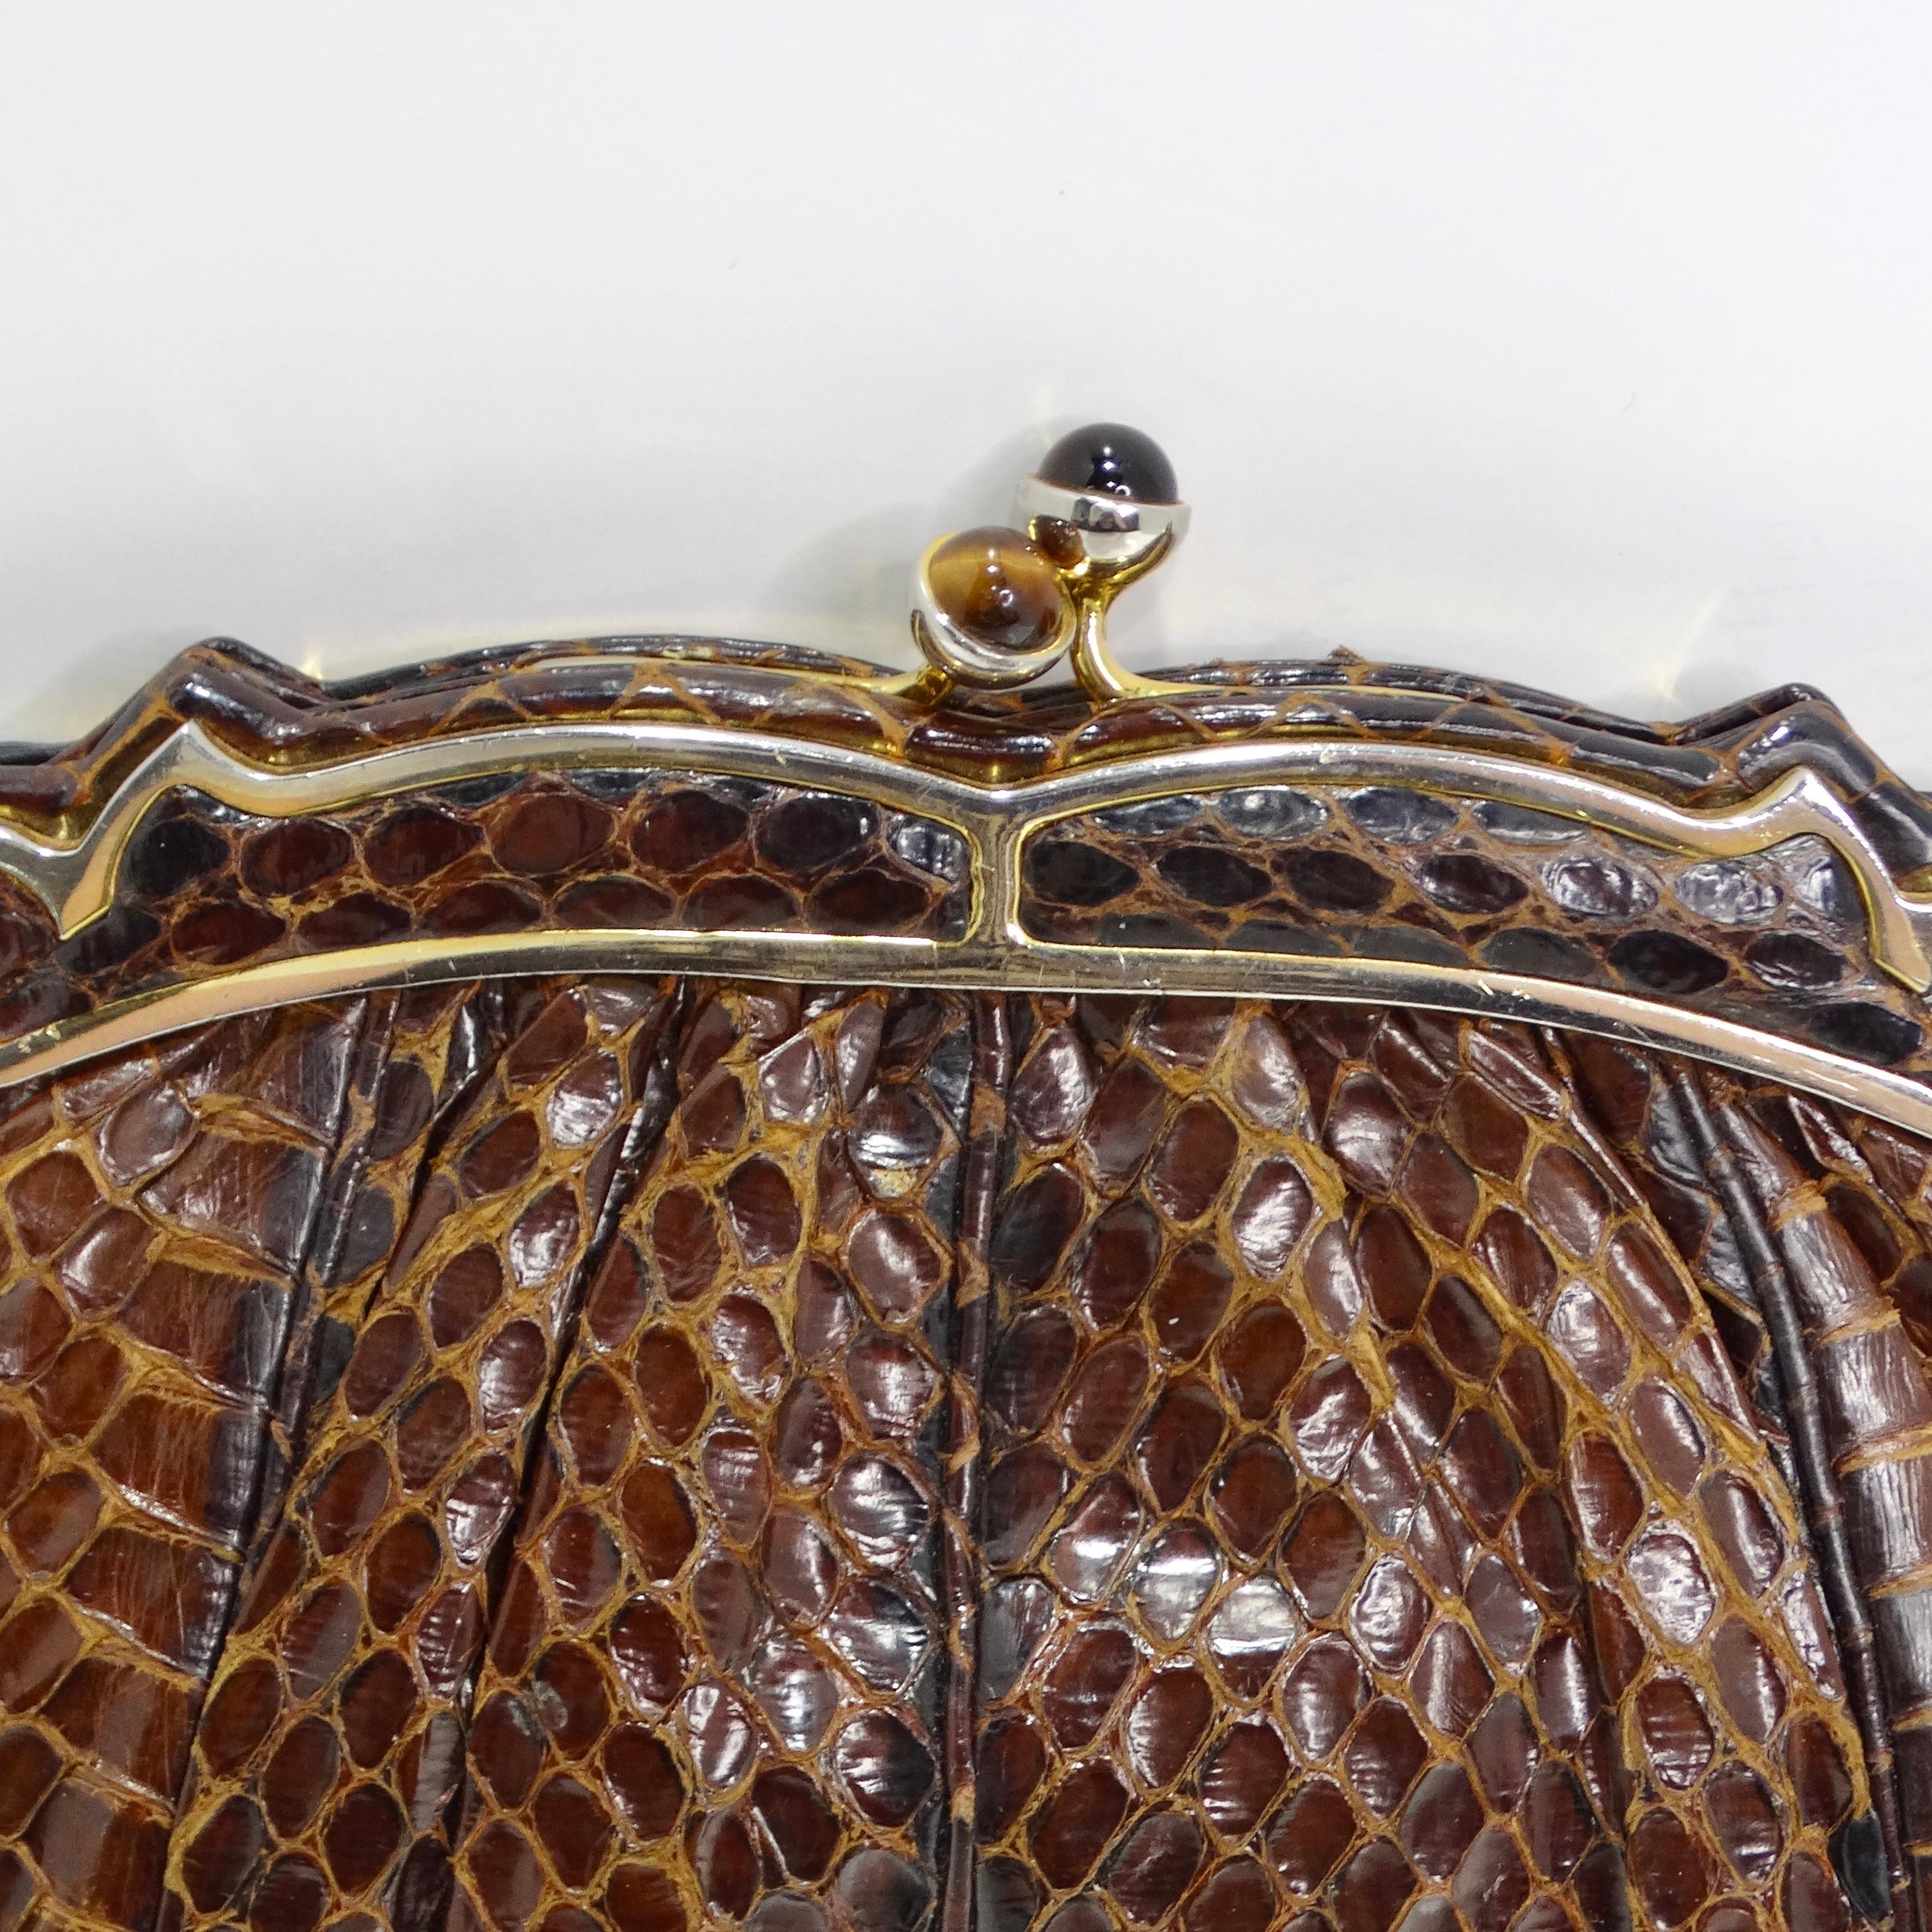 Introducing the exquisite Judith Leiber 1980s Brown Snakeskin Embossed Clutch, a luxurious and timeless accessory that exudes sophistication and glamour. Crafted from high-quality brown snakeskin embossed leather, this round clutch bag is a